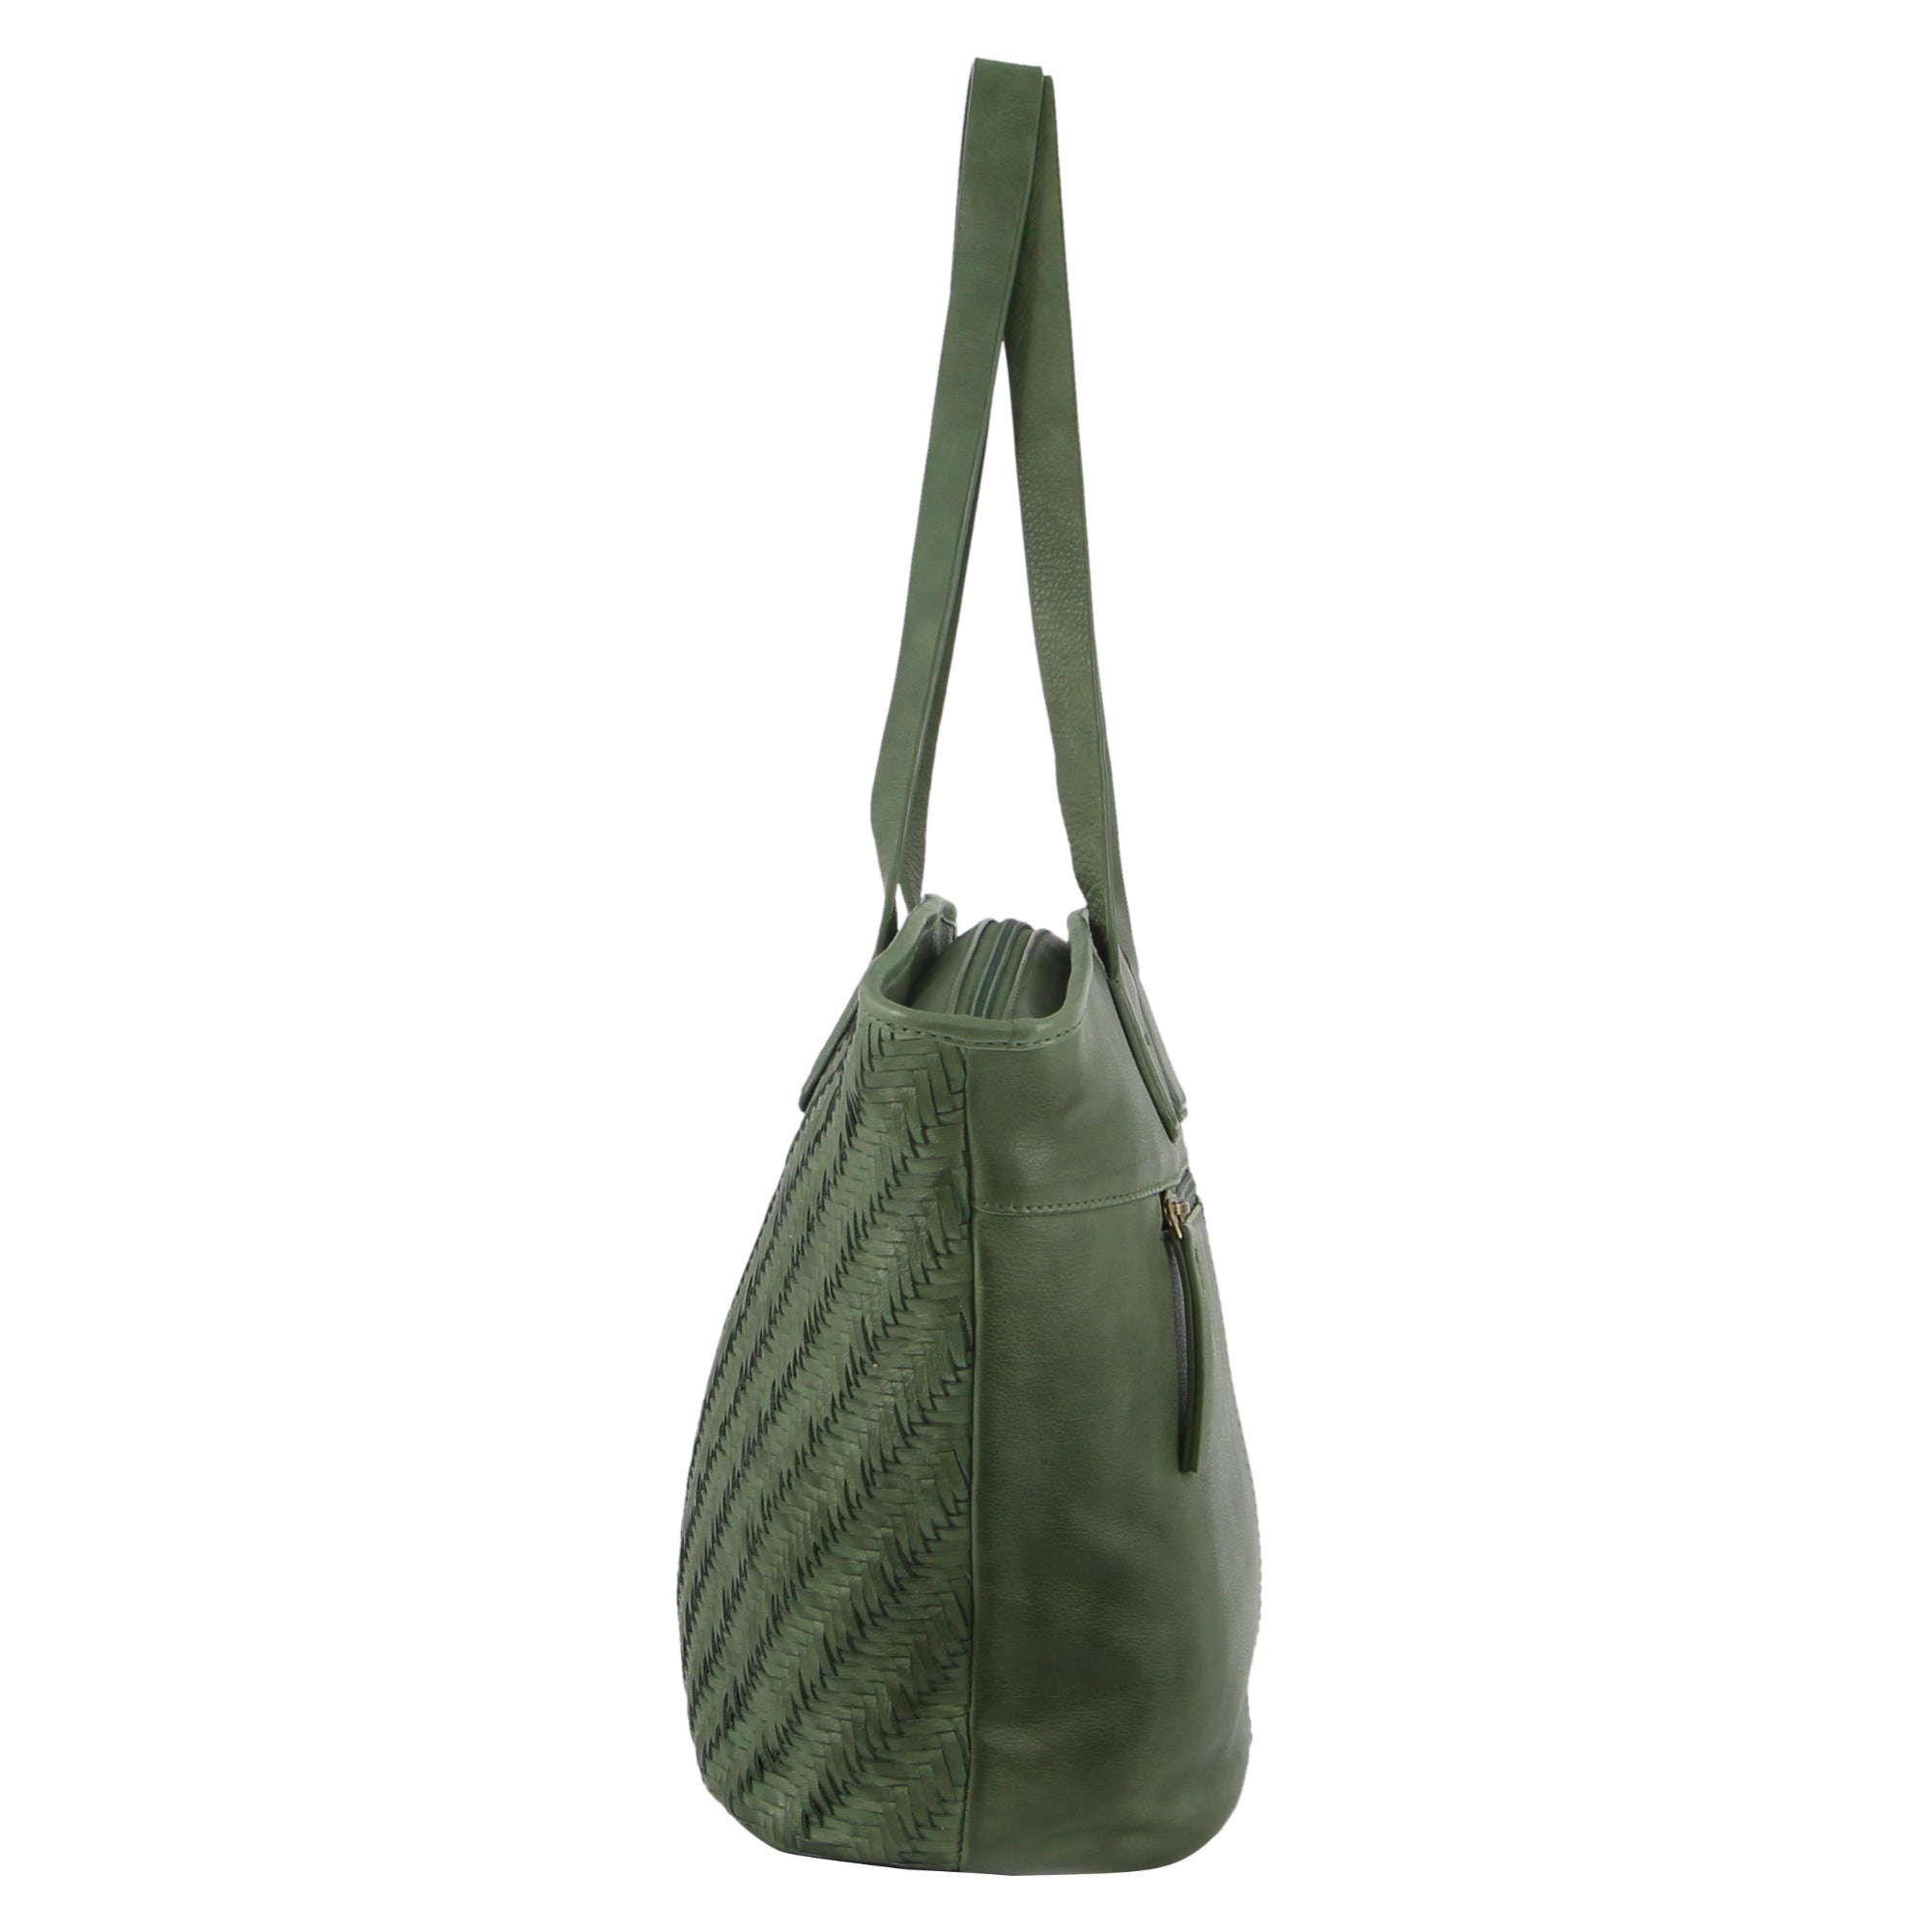 Pierre Cardin Woven Embossed Leather Shoulder Bag in Green